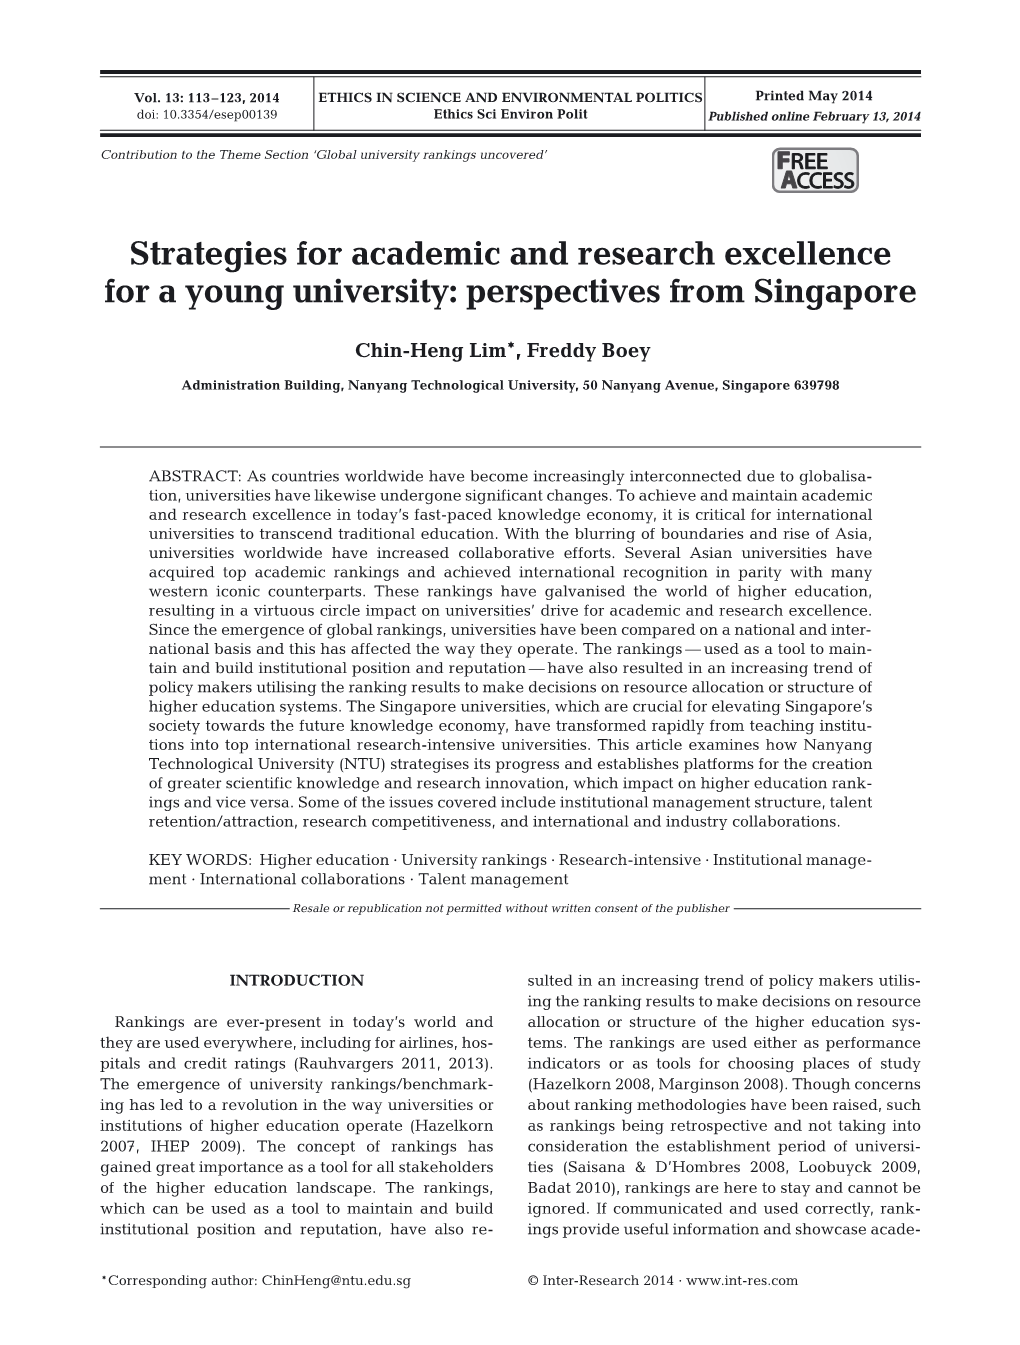 Strategies for Academic and Research Excellence for a Young University: Perspectives from Singapore